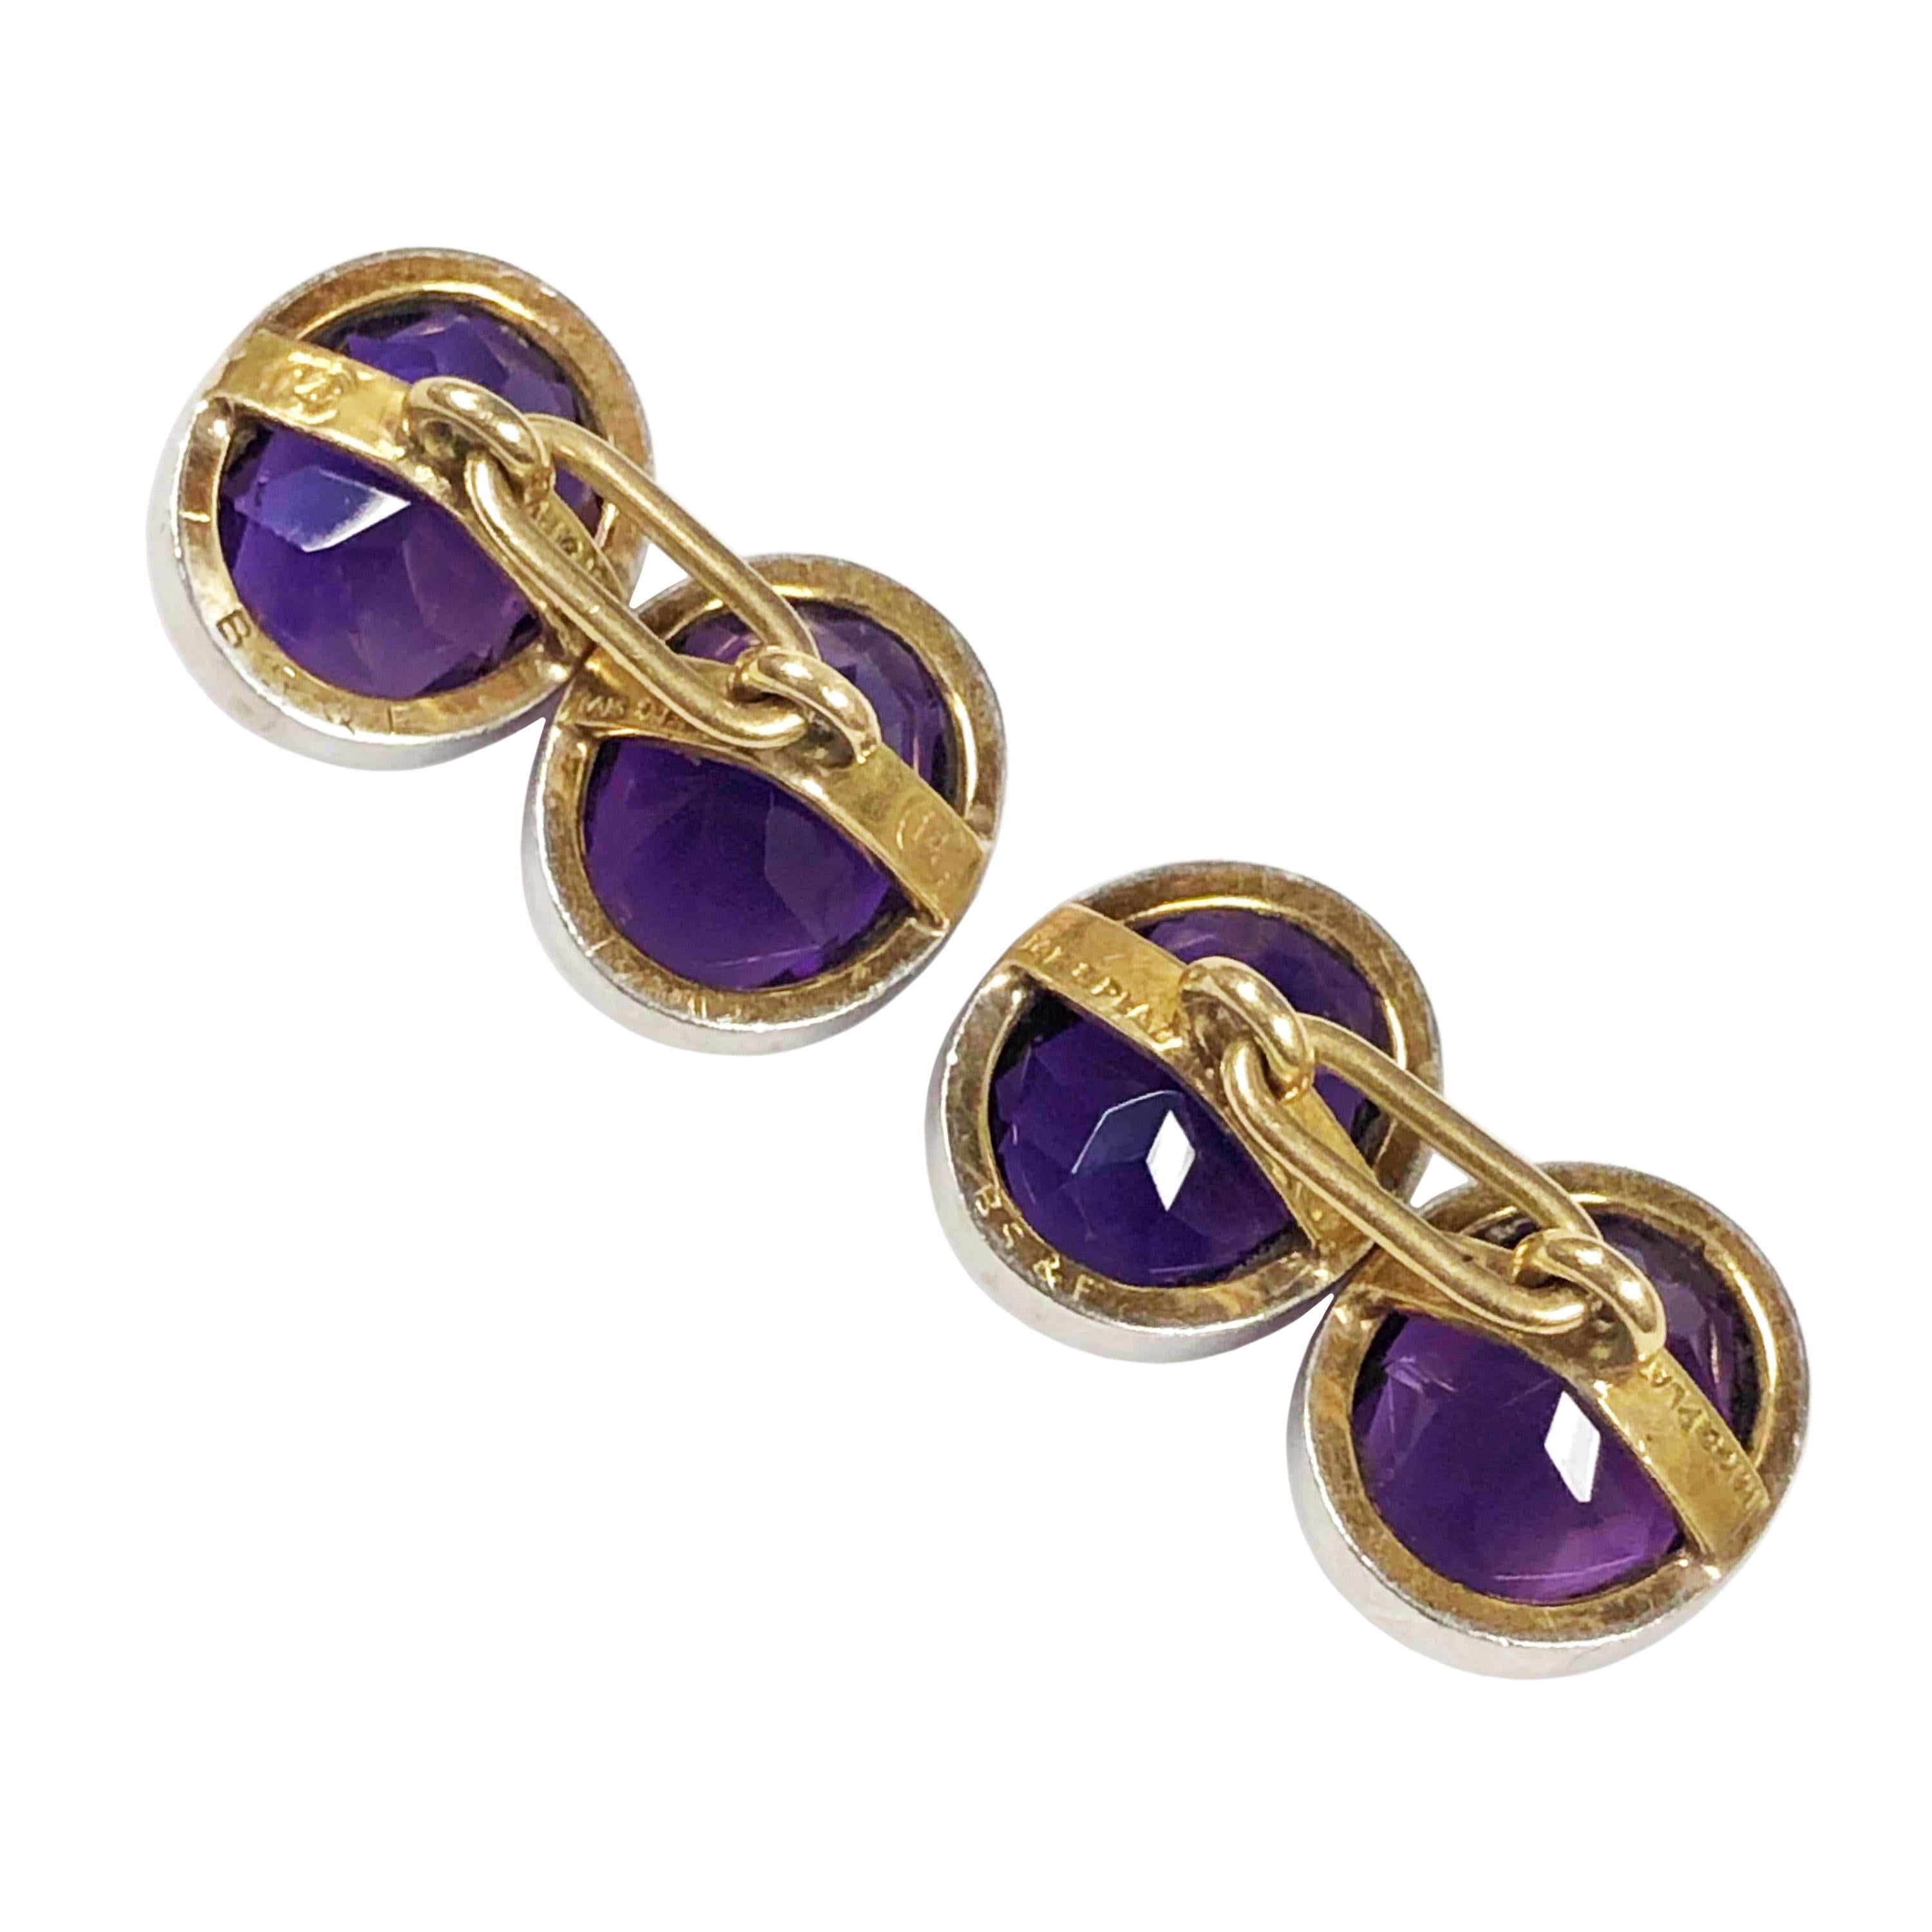 Edwardian Antique Black Star and Frost Platinum Gold and Amethyst Cufflinks